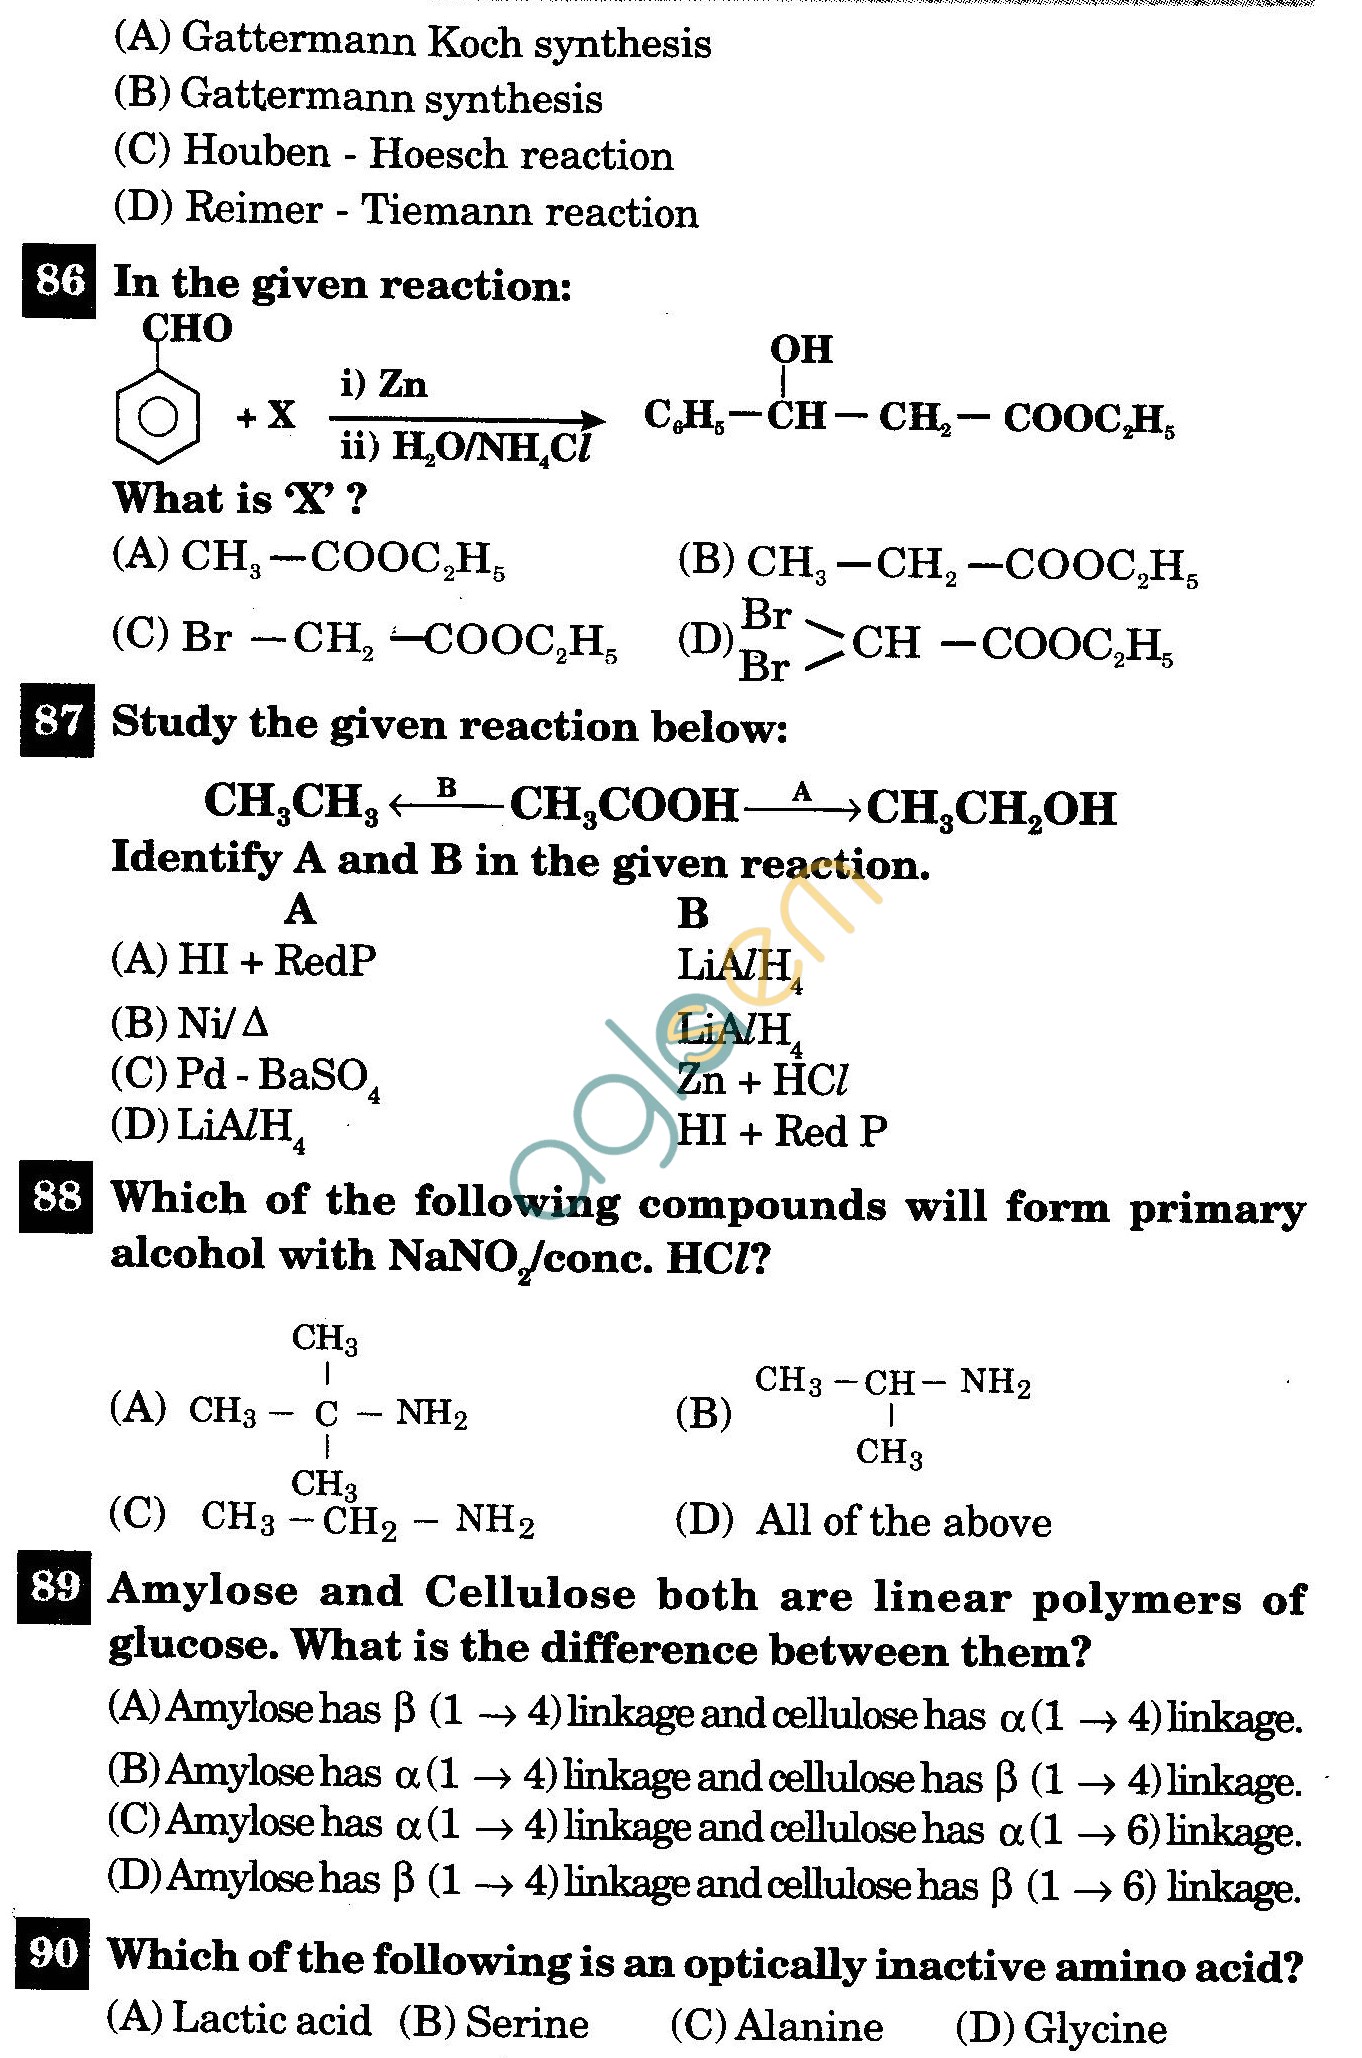 NSTSE 2011 Class XII PCM Question Paper with Answers - Chemistry